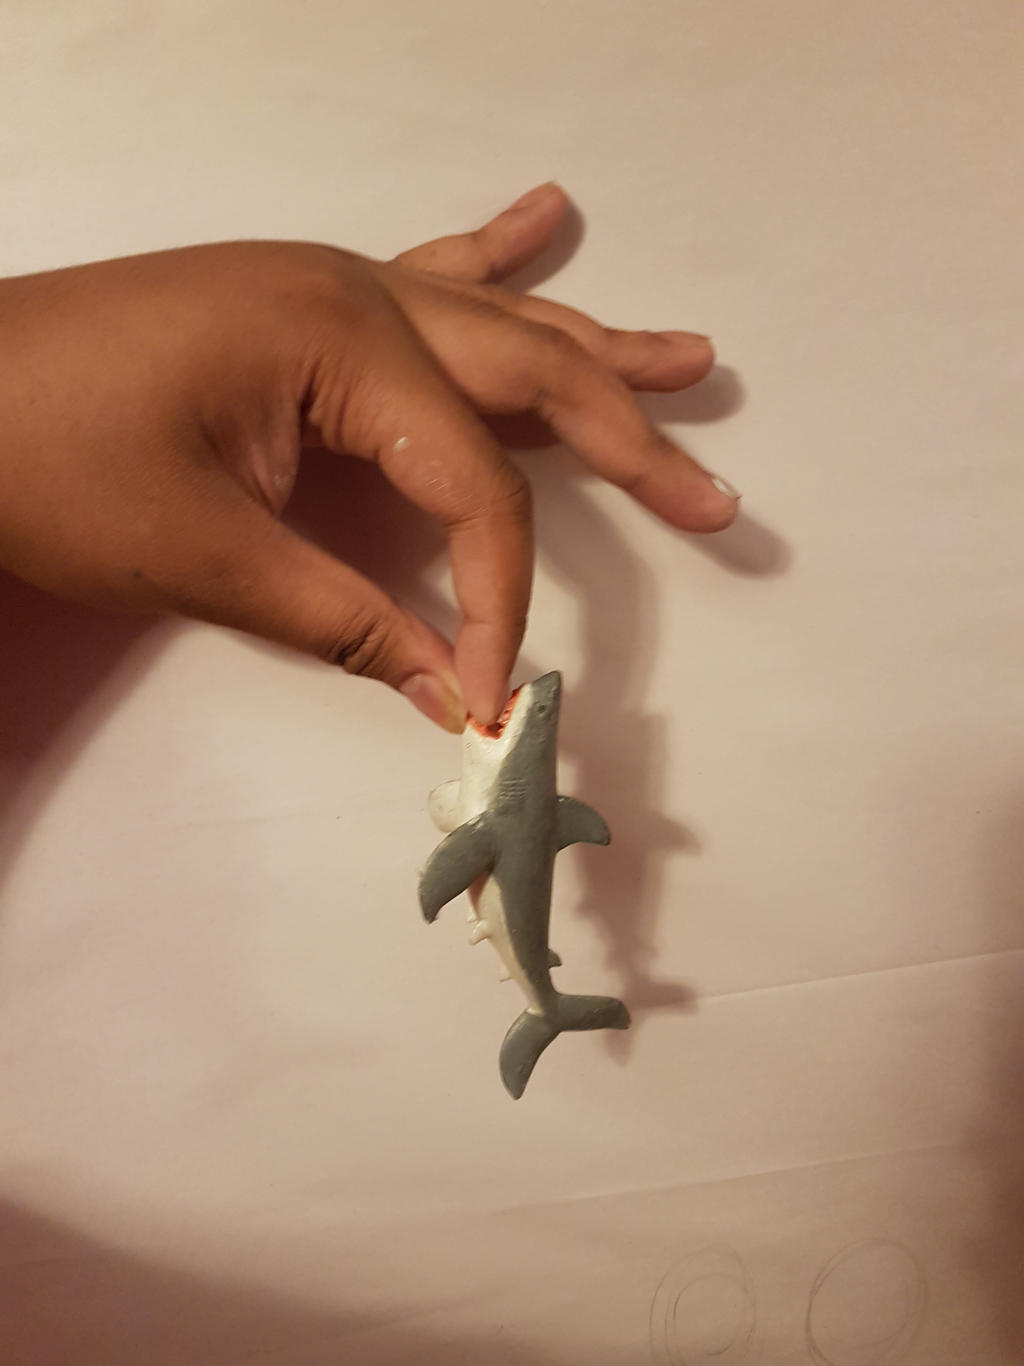 Hands to draw challenge shark attack